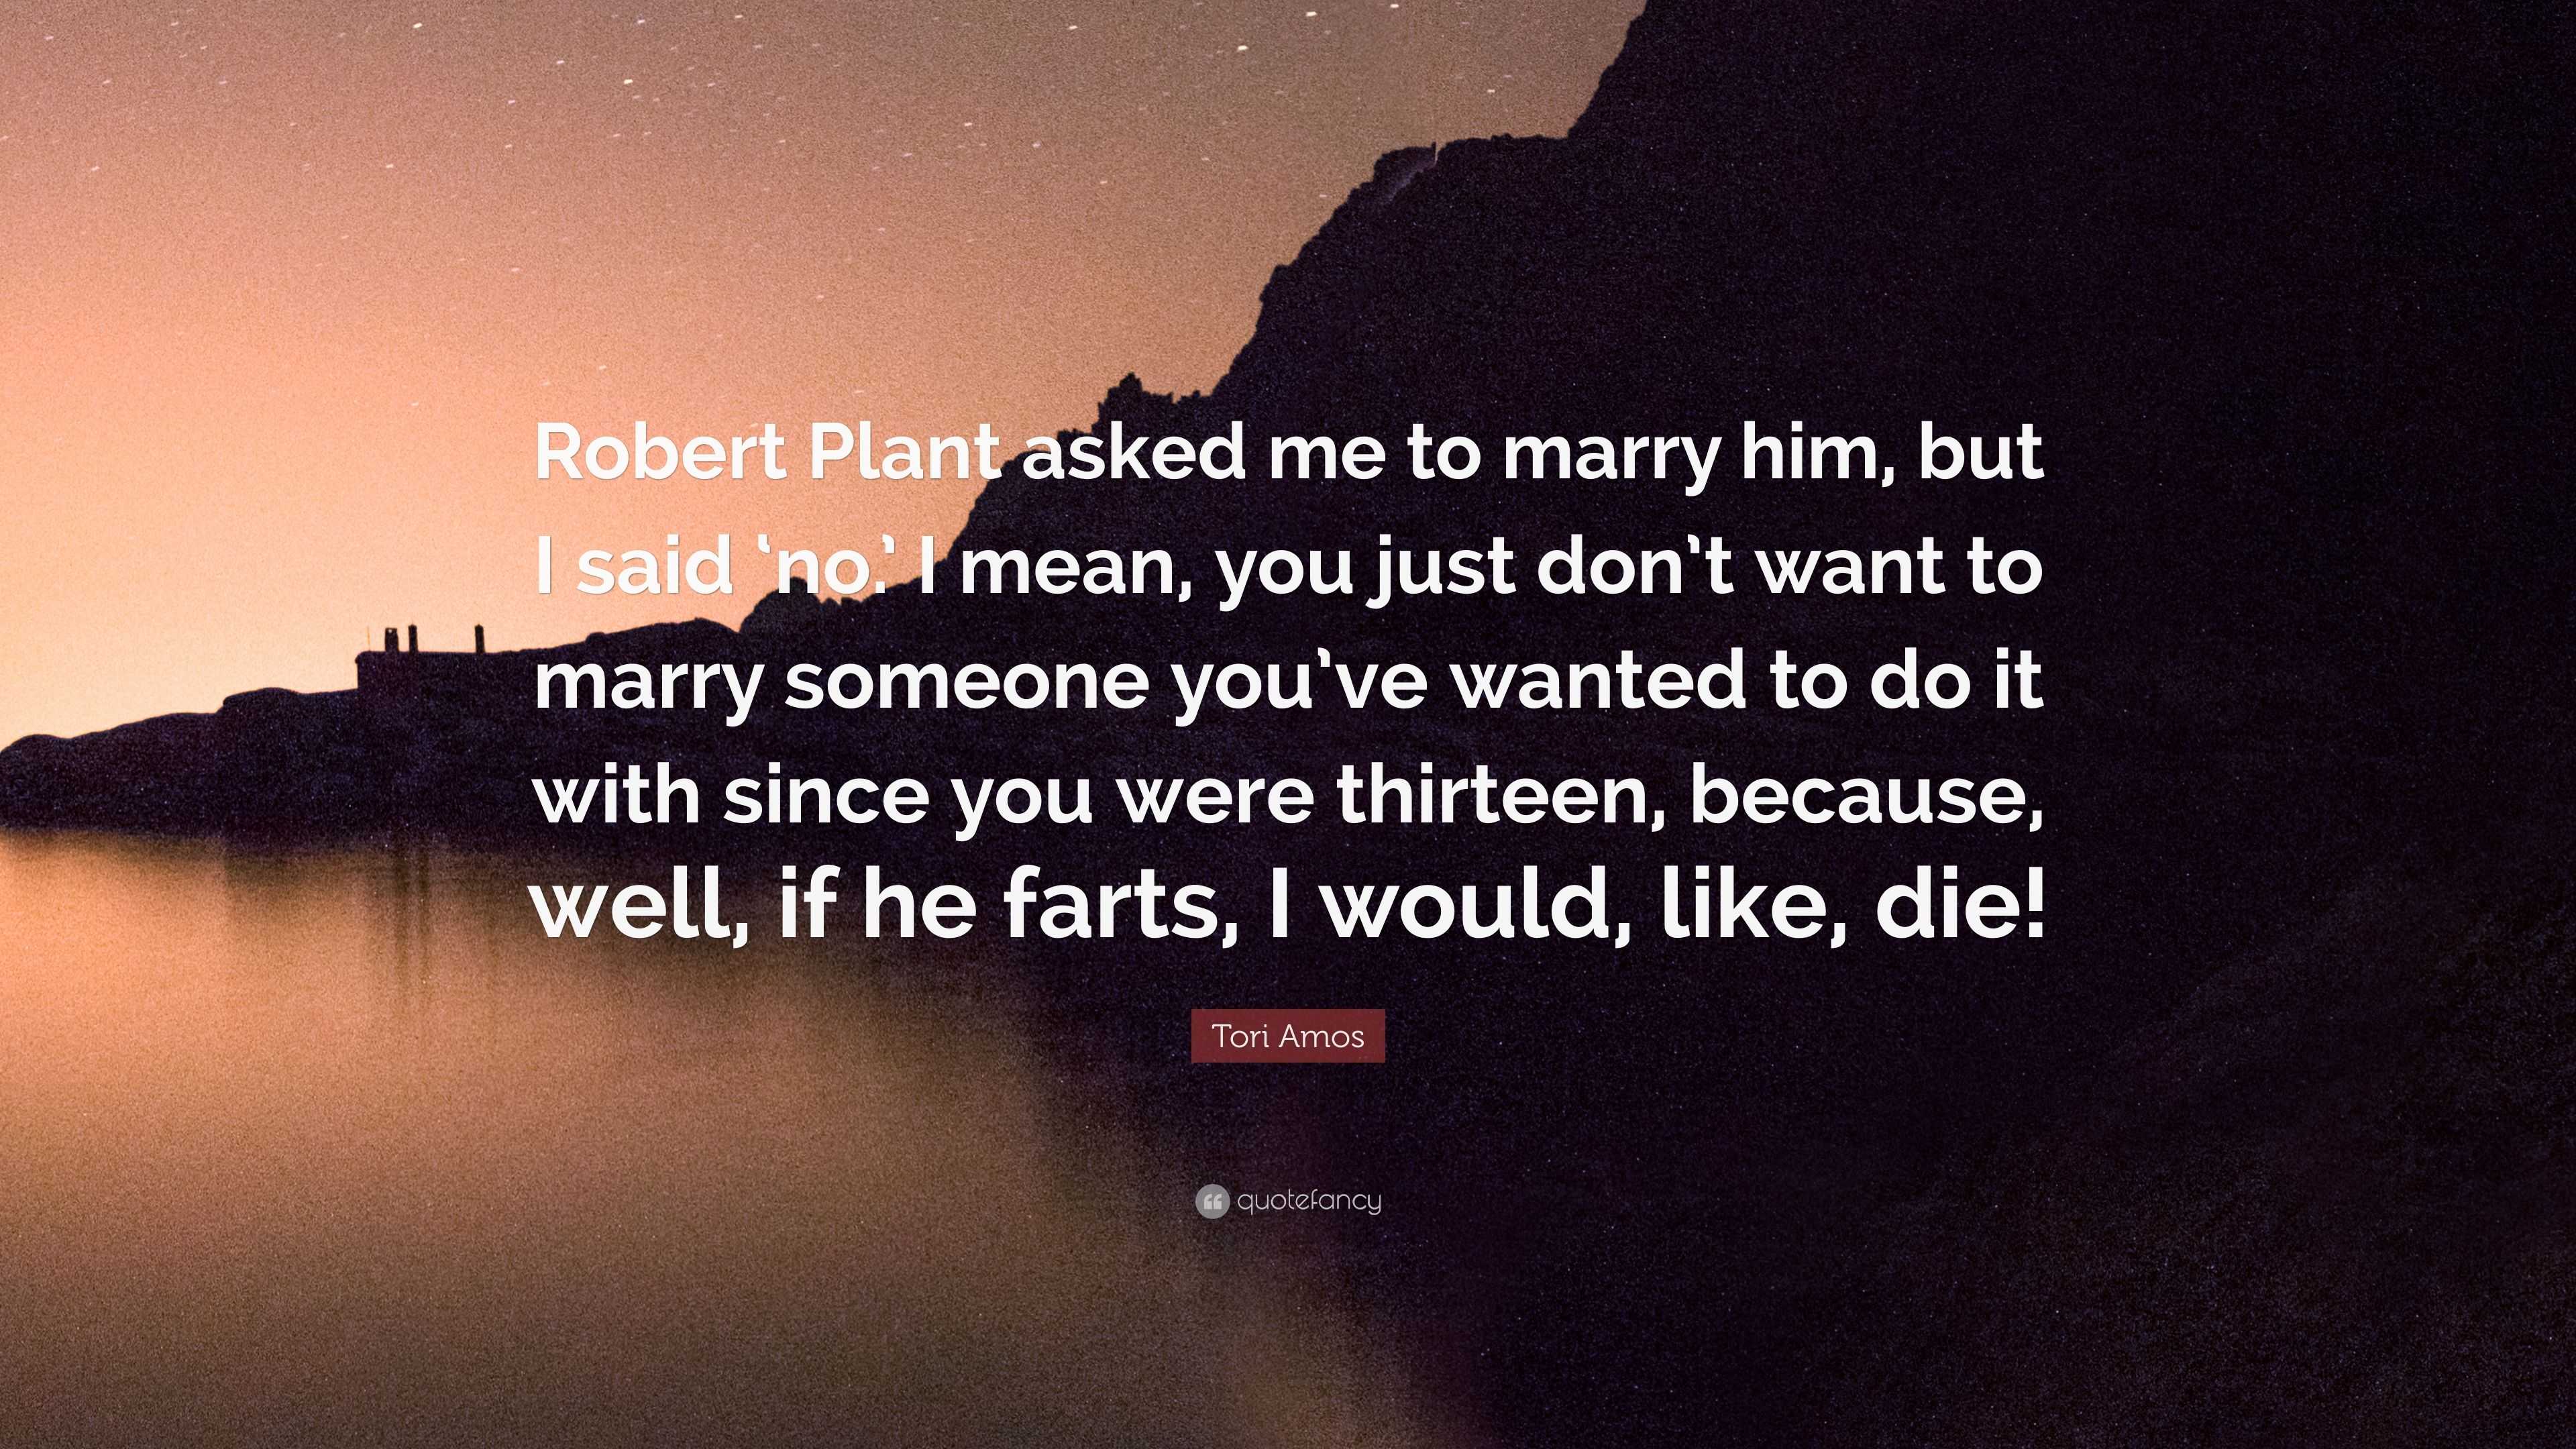 Tori Amos Quote “Robert Plant asked me to marry him but I said